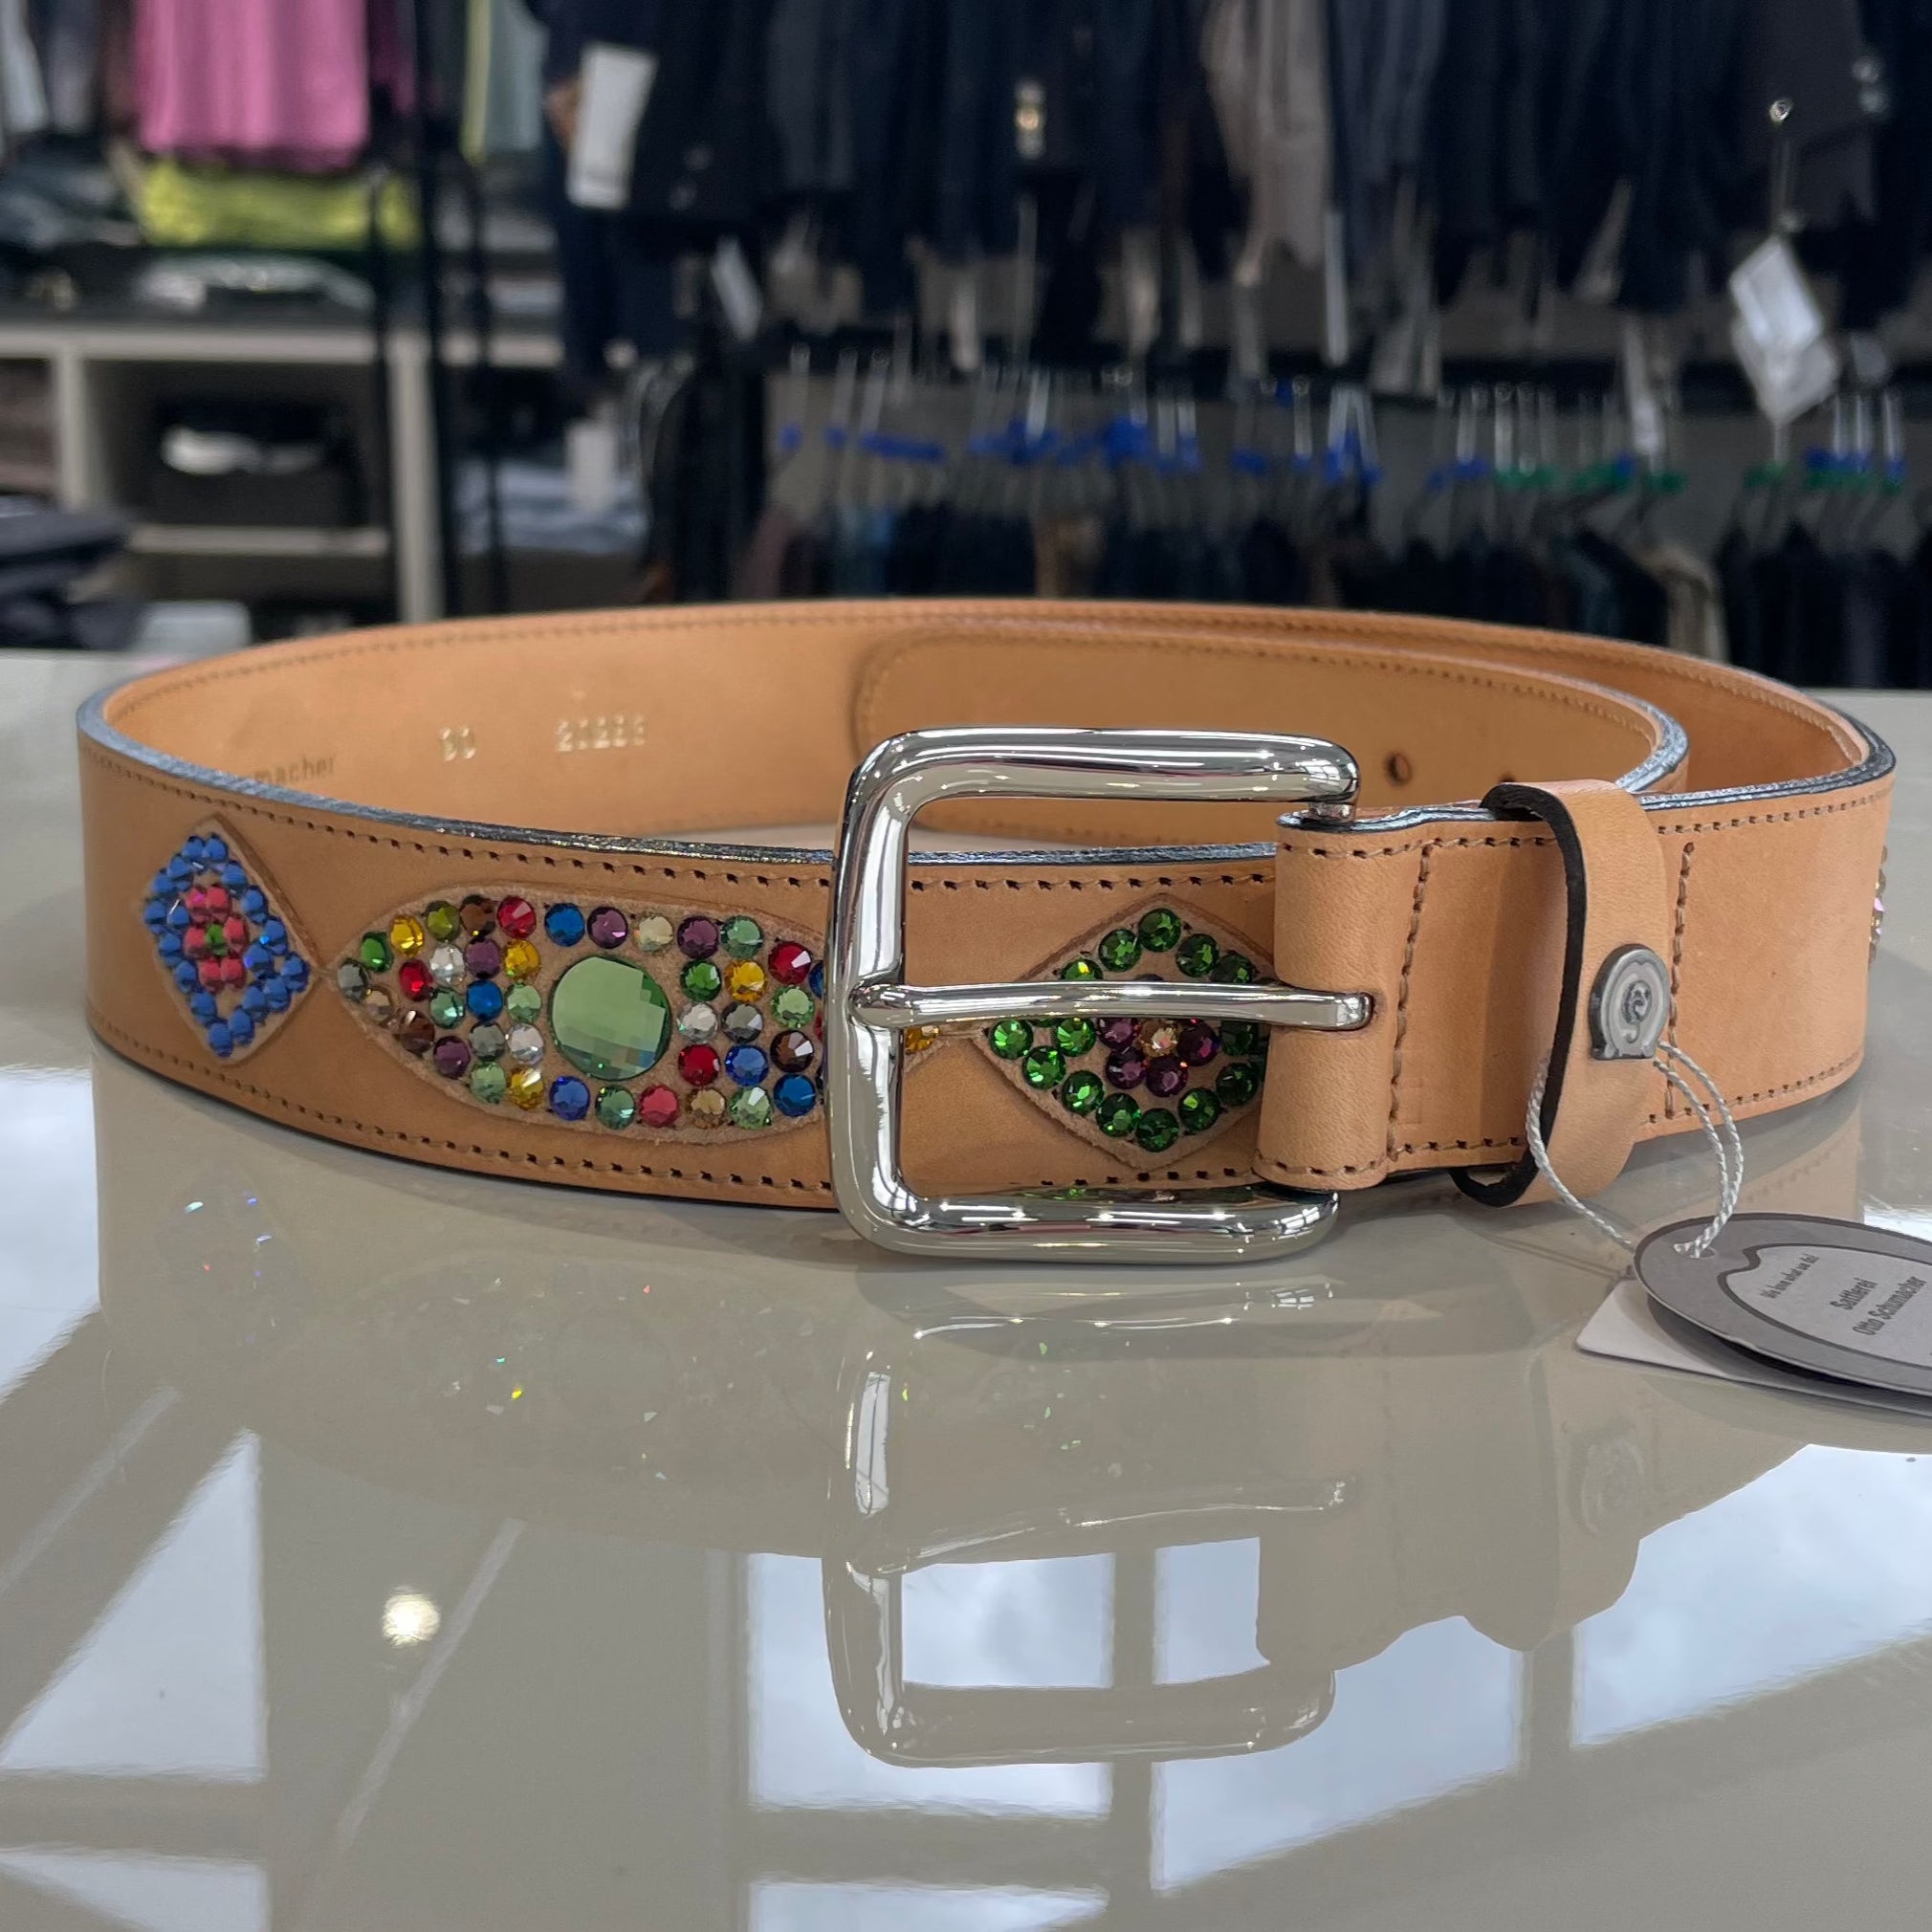 Otto Schumacher Freestyle Belt 90cm- in stock and ready to wear!